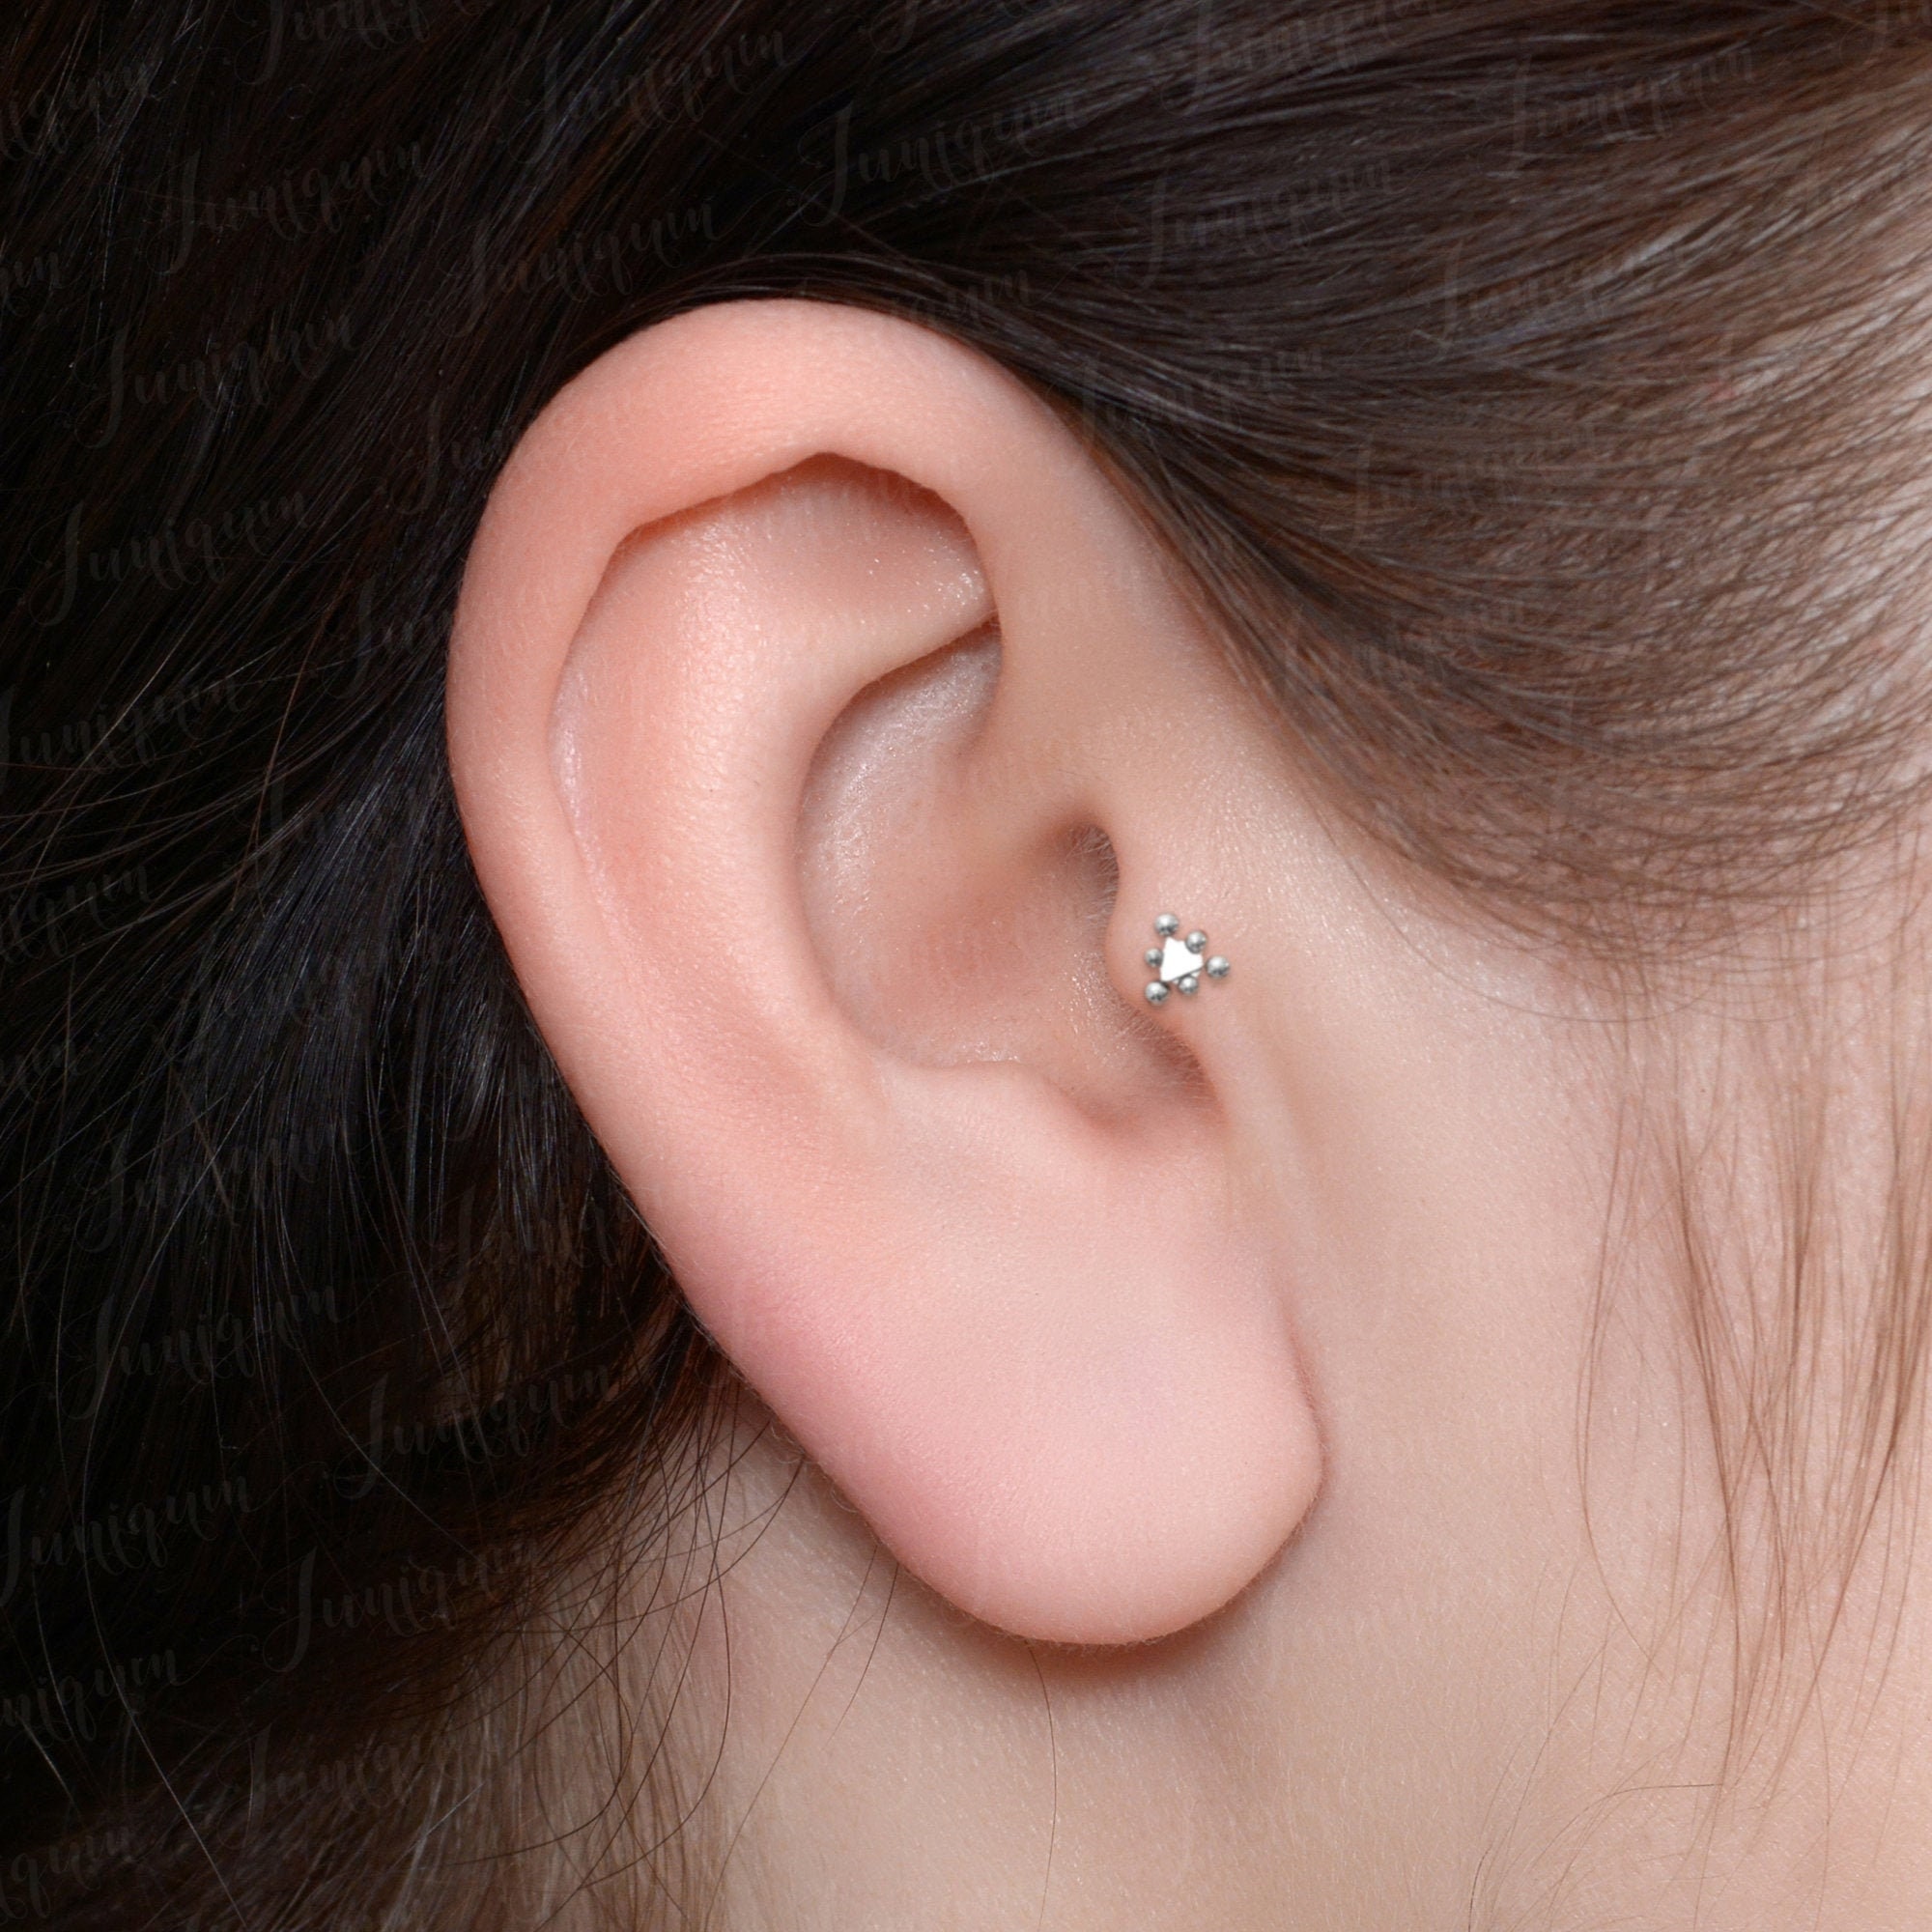 Tragus Jewelry. Forward Helix Earring. Conch - Etsy